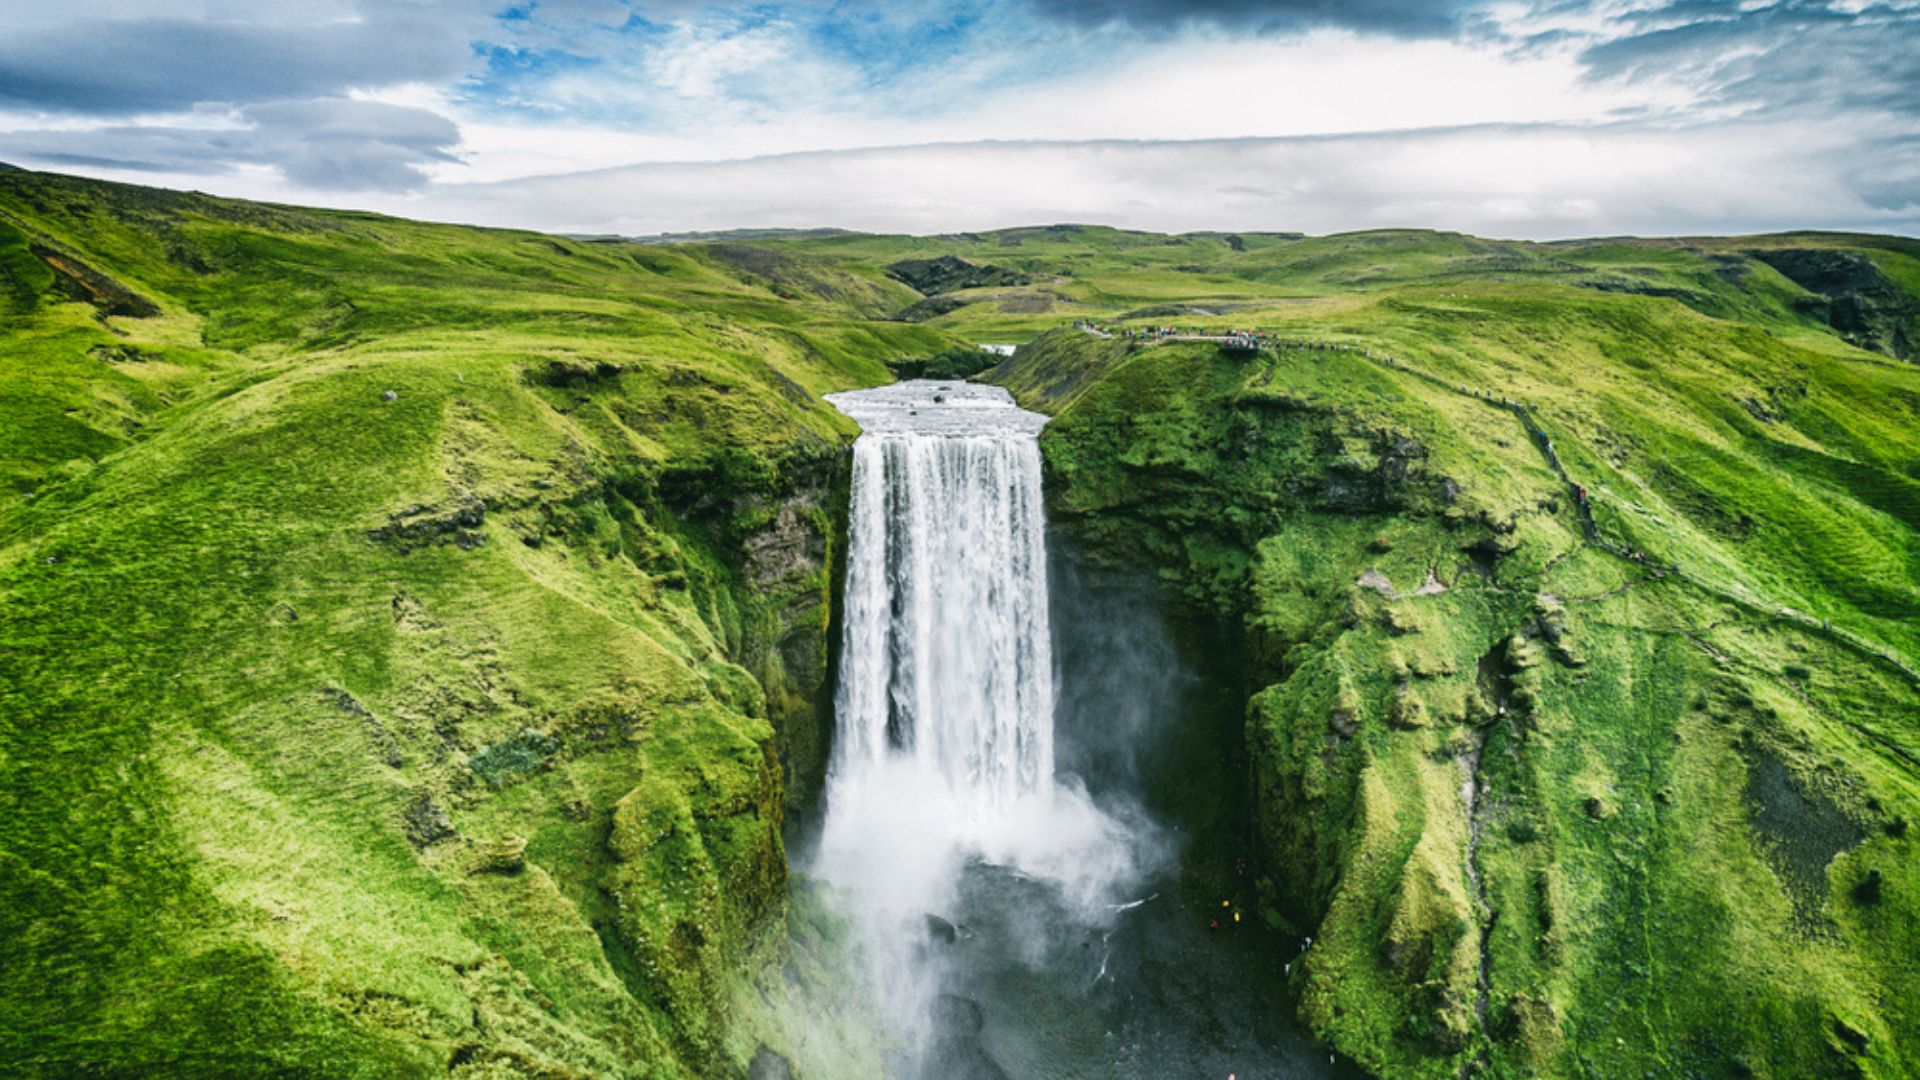 Skógafoss is one of the biggest waterfalls in Iceland